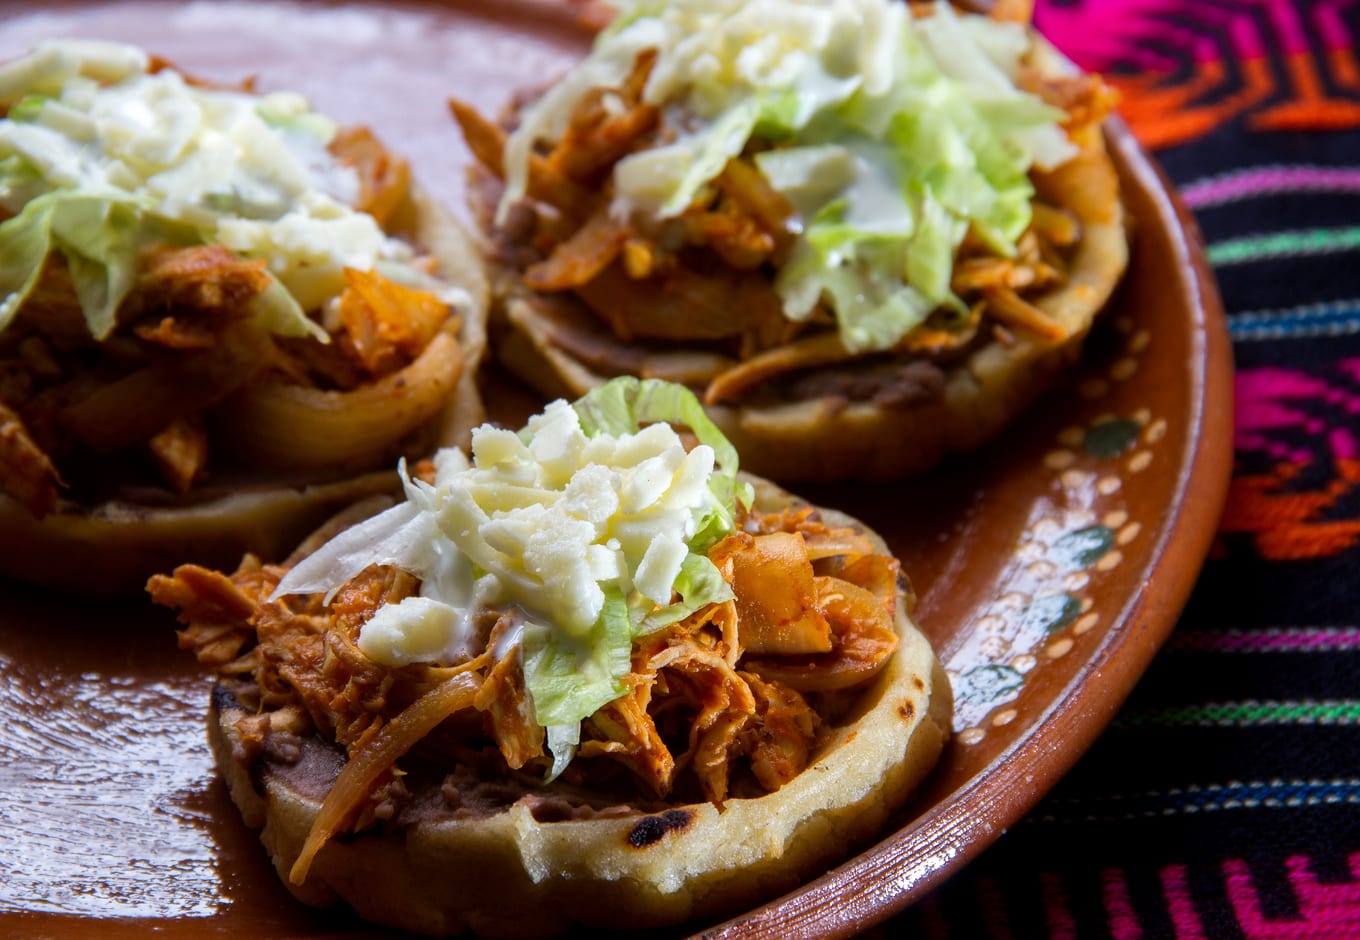 A plate of Tinga Sopes, a traditional Mexican dish.